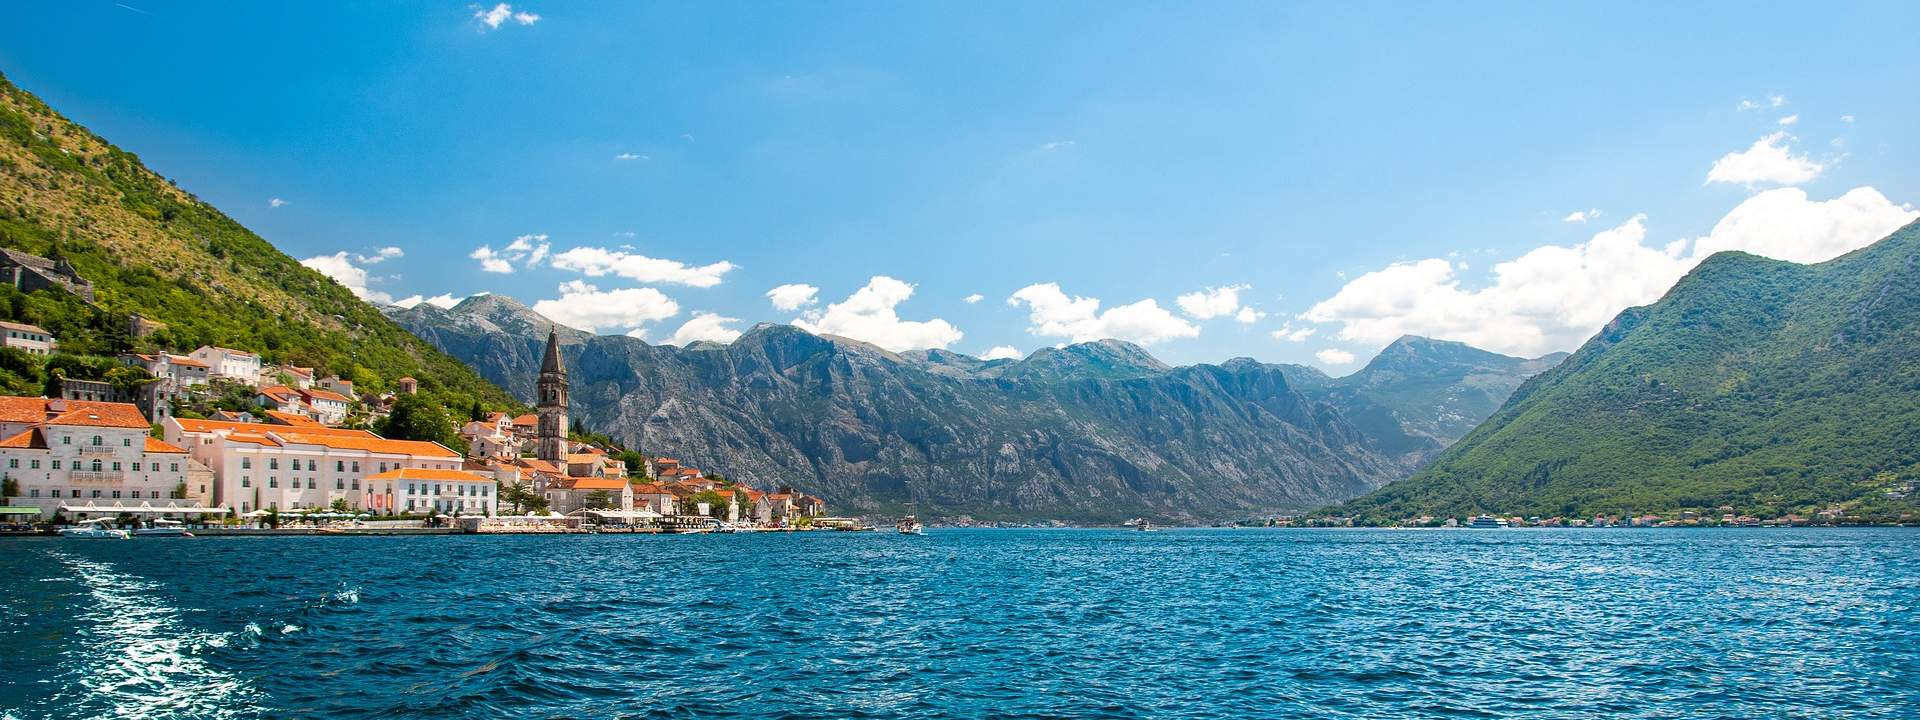 Explore Montenegro from the Adriatic coast to the Bay of Kotor